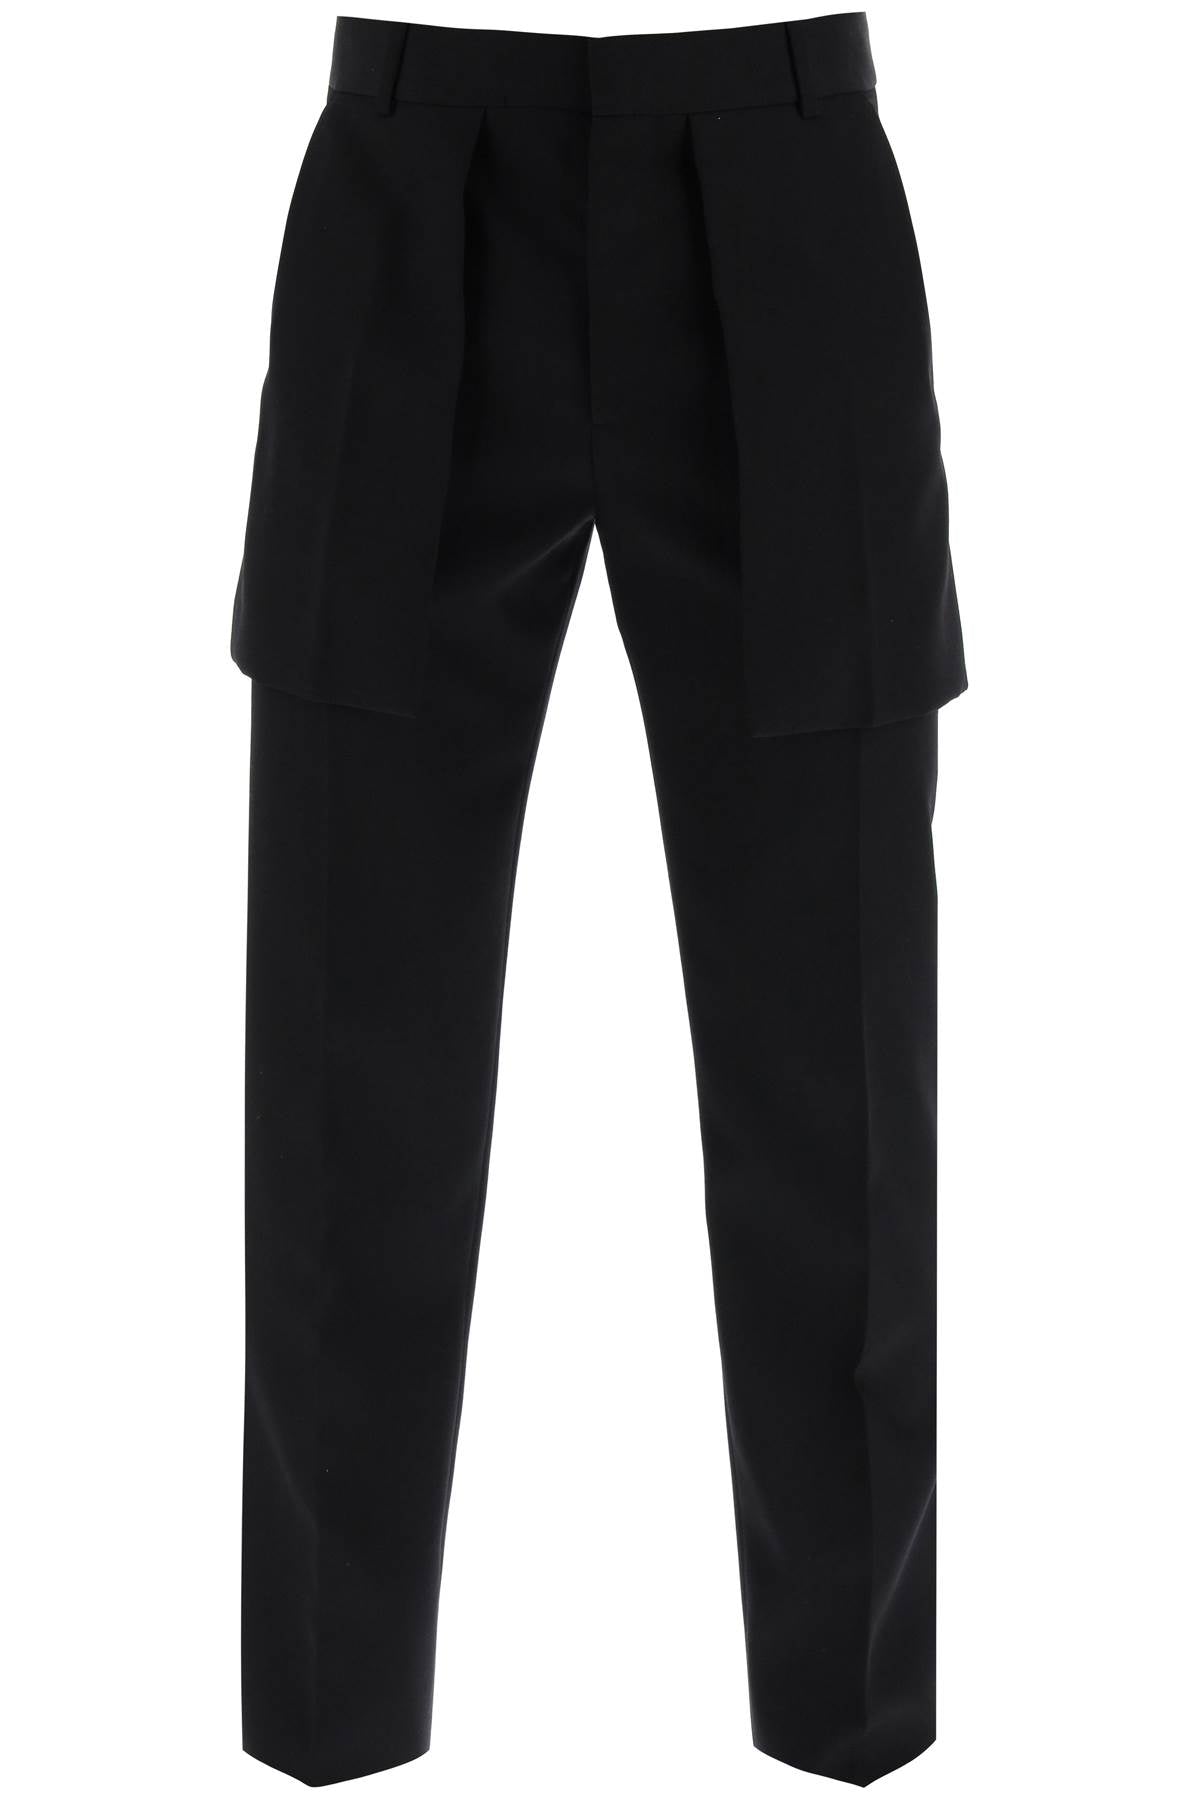 ALEXANDER MCQUEEN Sophisticated Mid-Waisted Tailored Trousers for Men in Classic Khaki